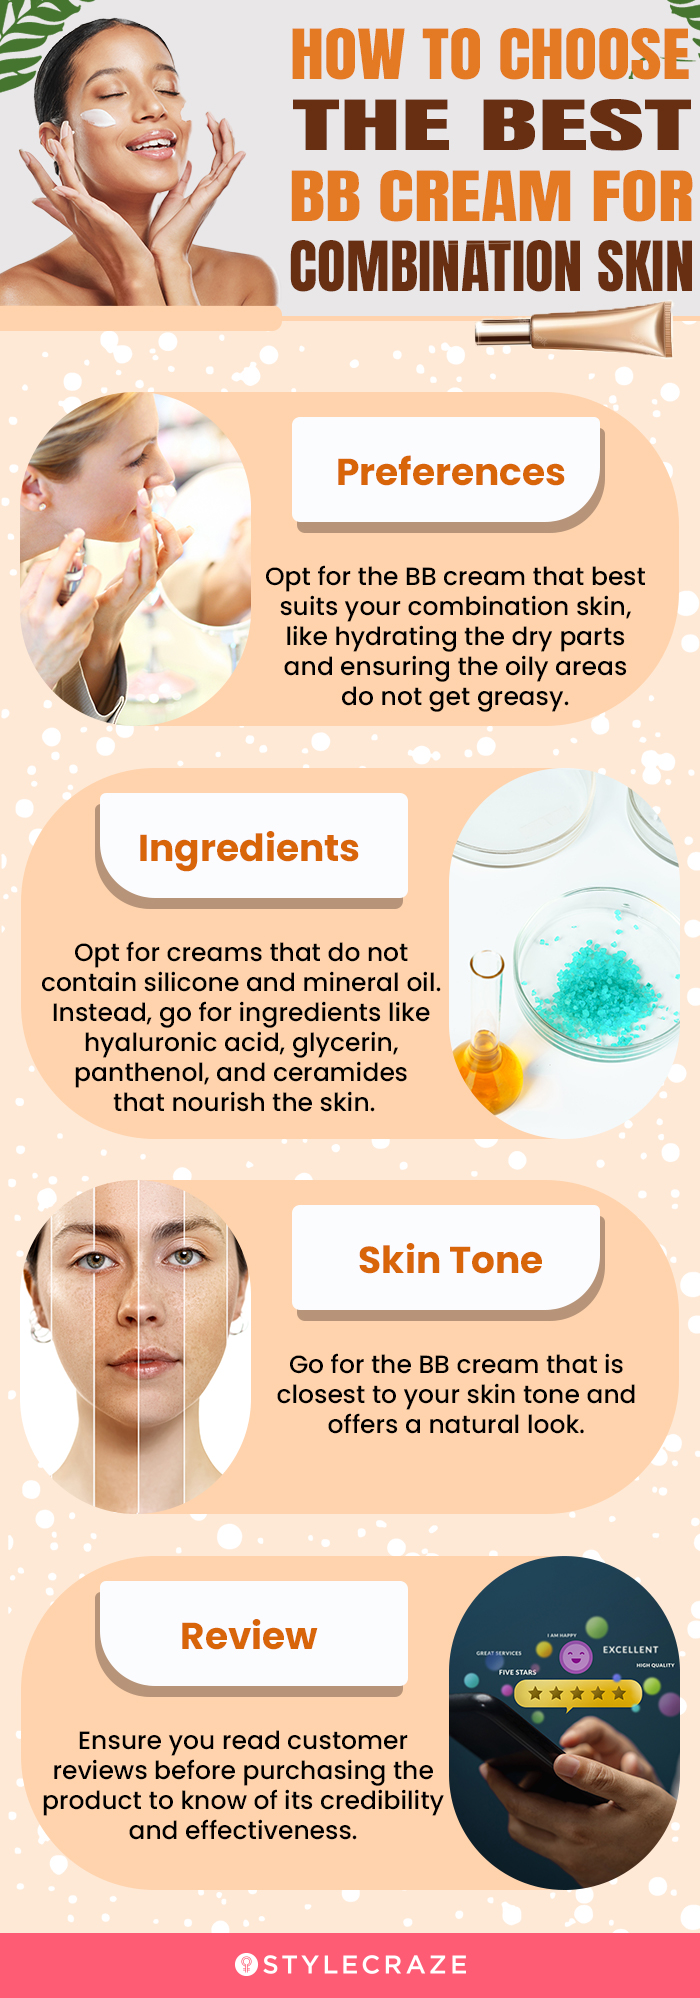 How To Choose The Best BB Cream For Combination Skin (infographic)